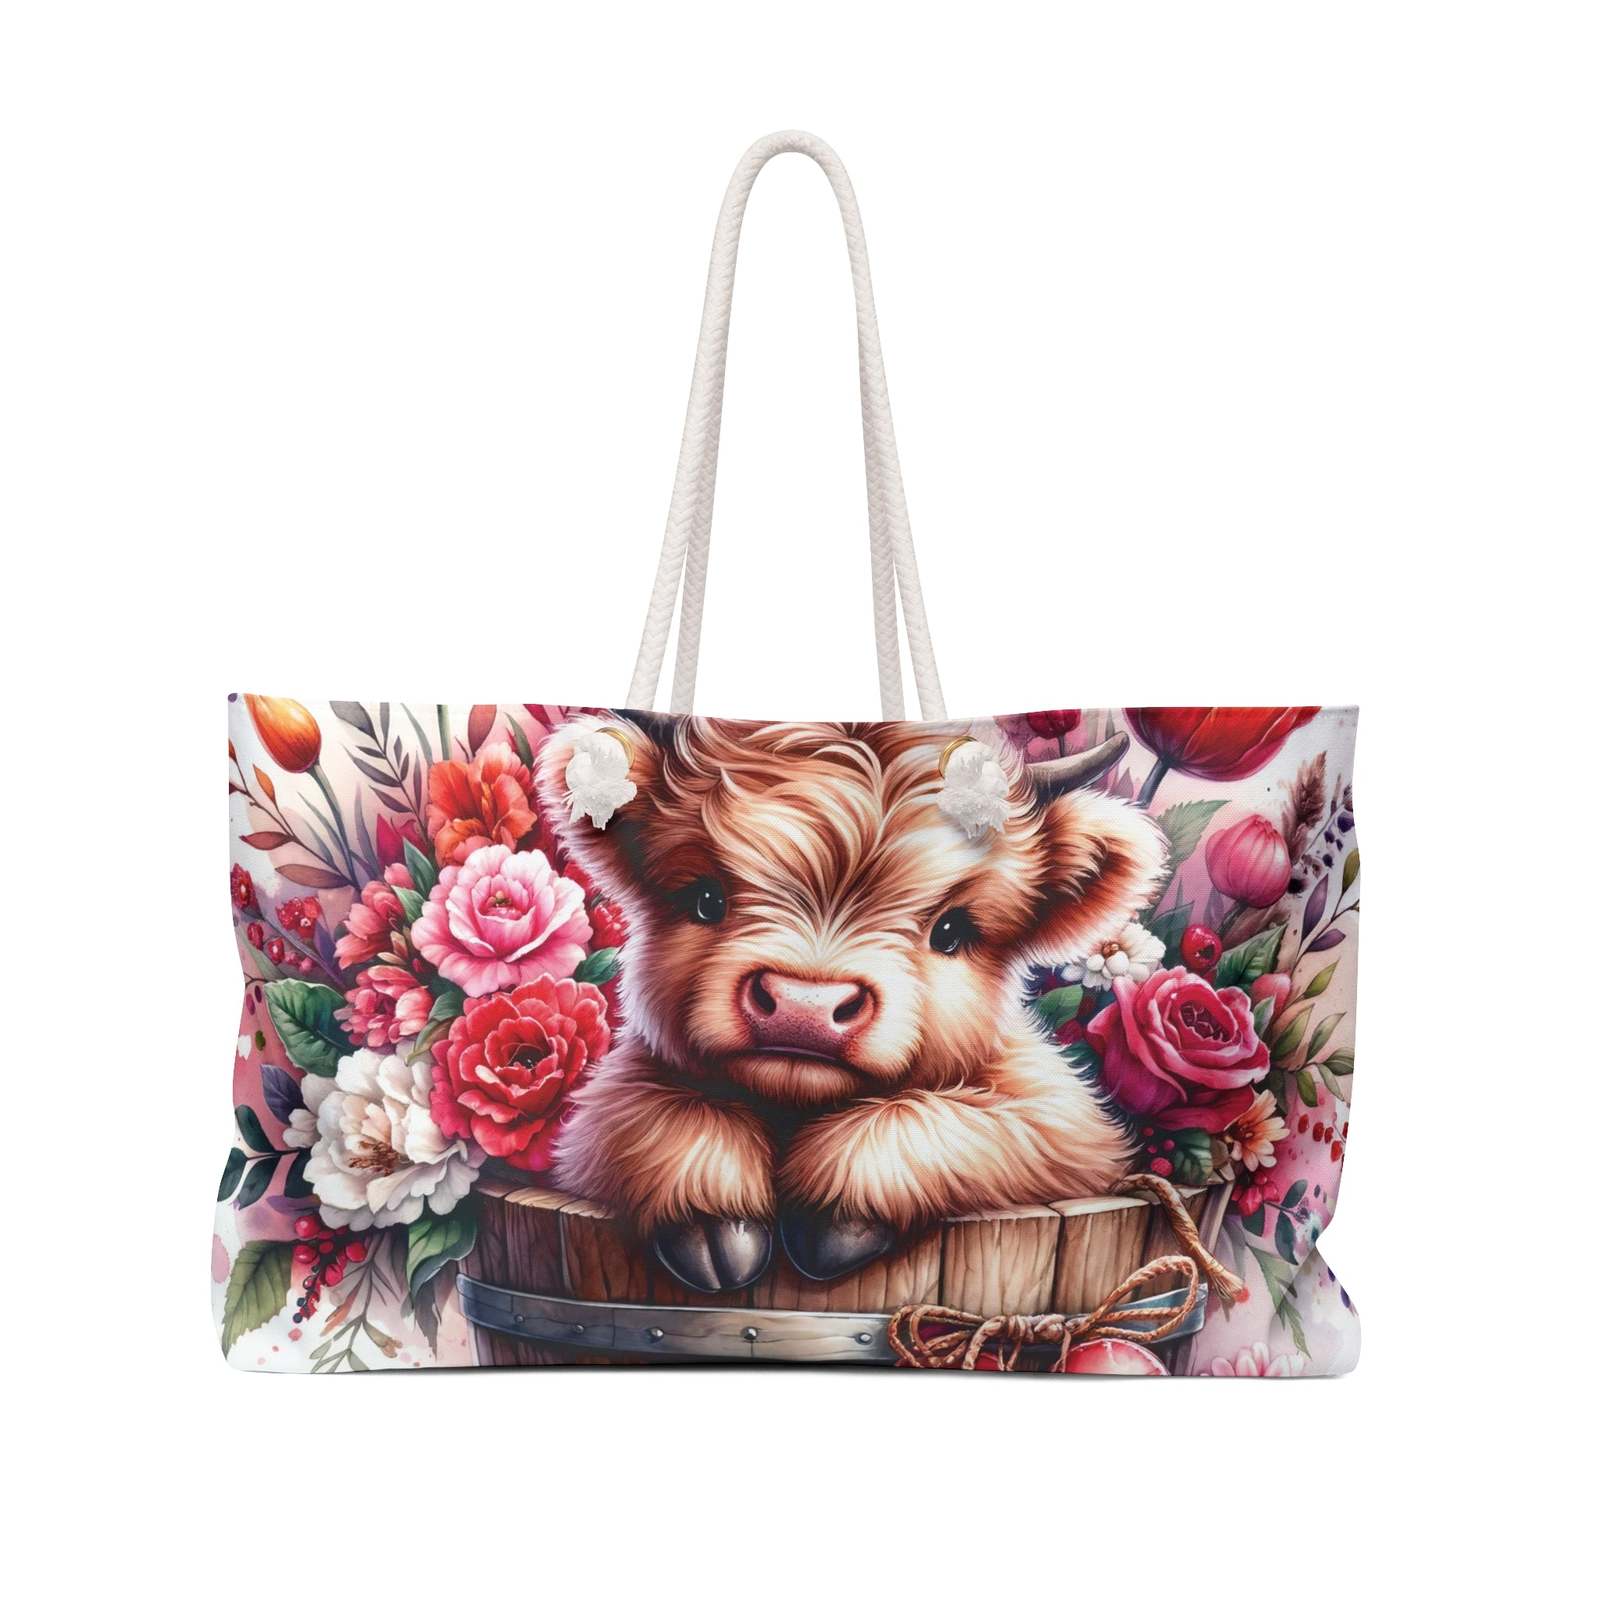 Primary image for Personalised/Non-Personalised Weekender Bag, Highland Cow, Pink and Red Roses, L